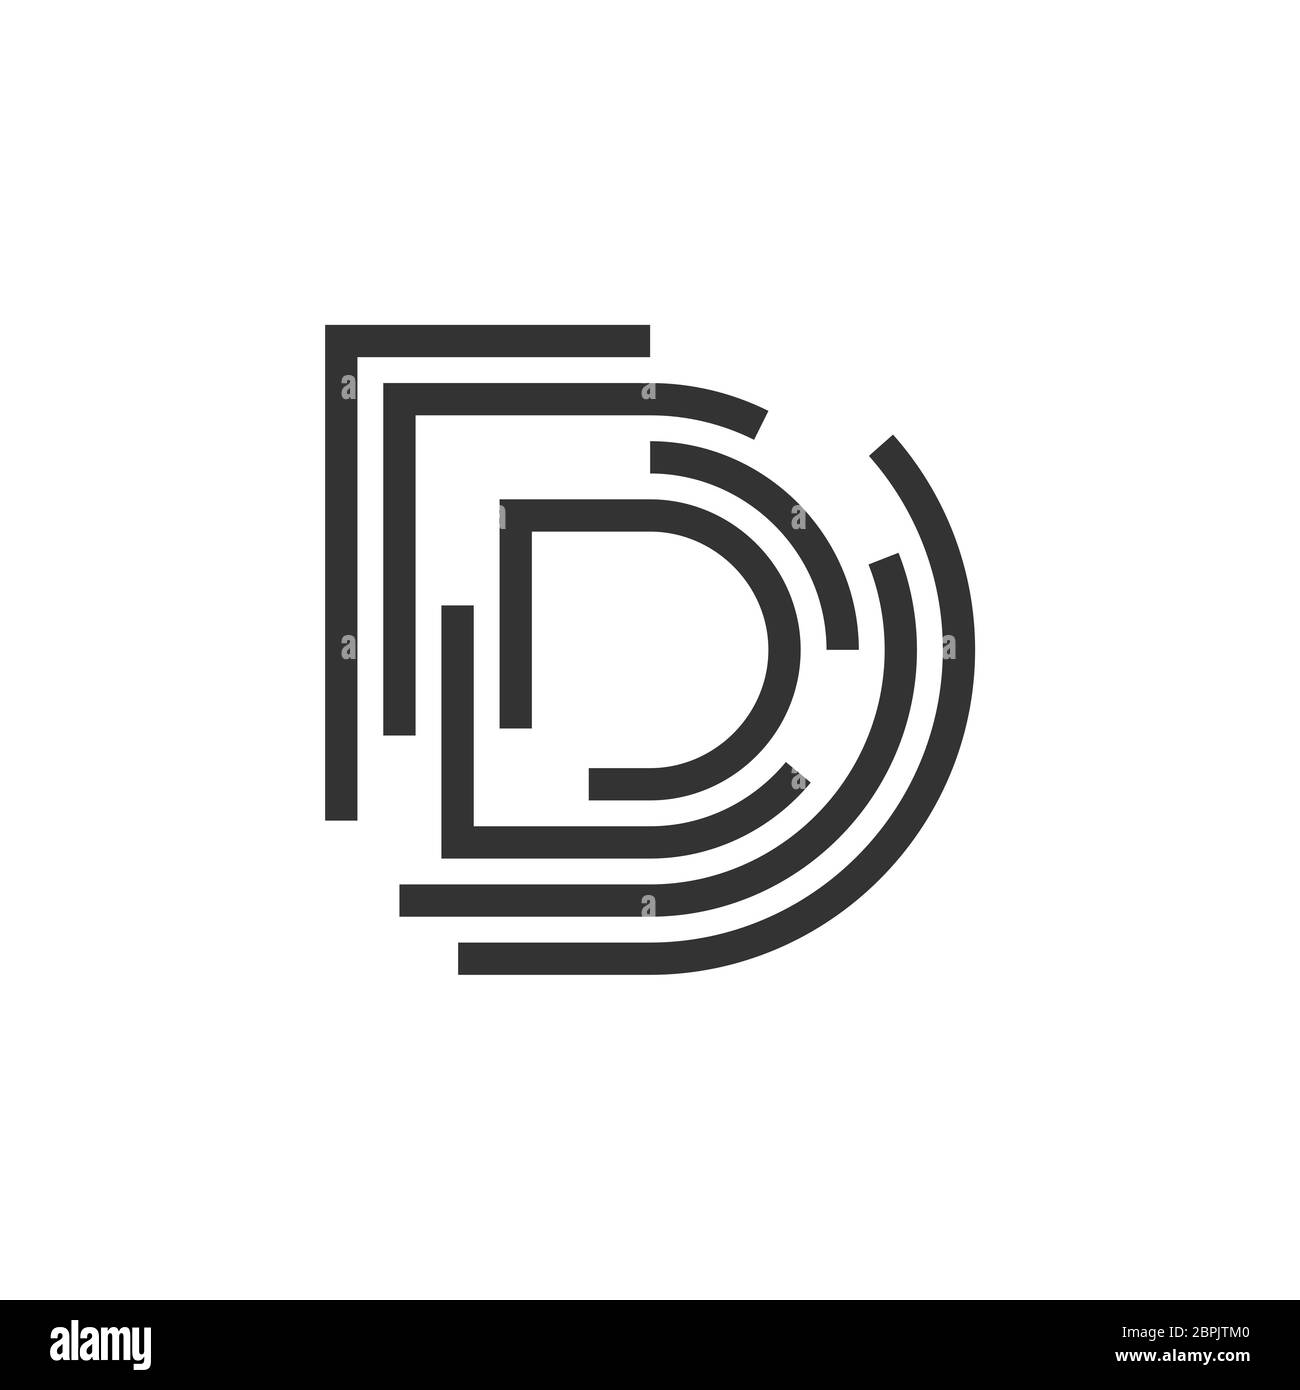 Letter d logo Black and White Stock Photos & Images - Alamy